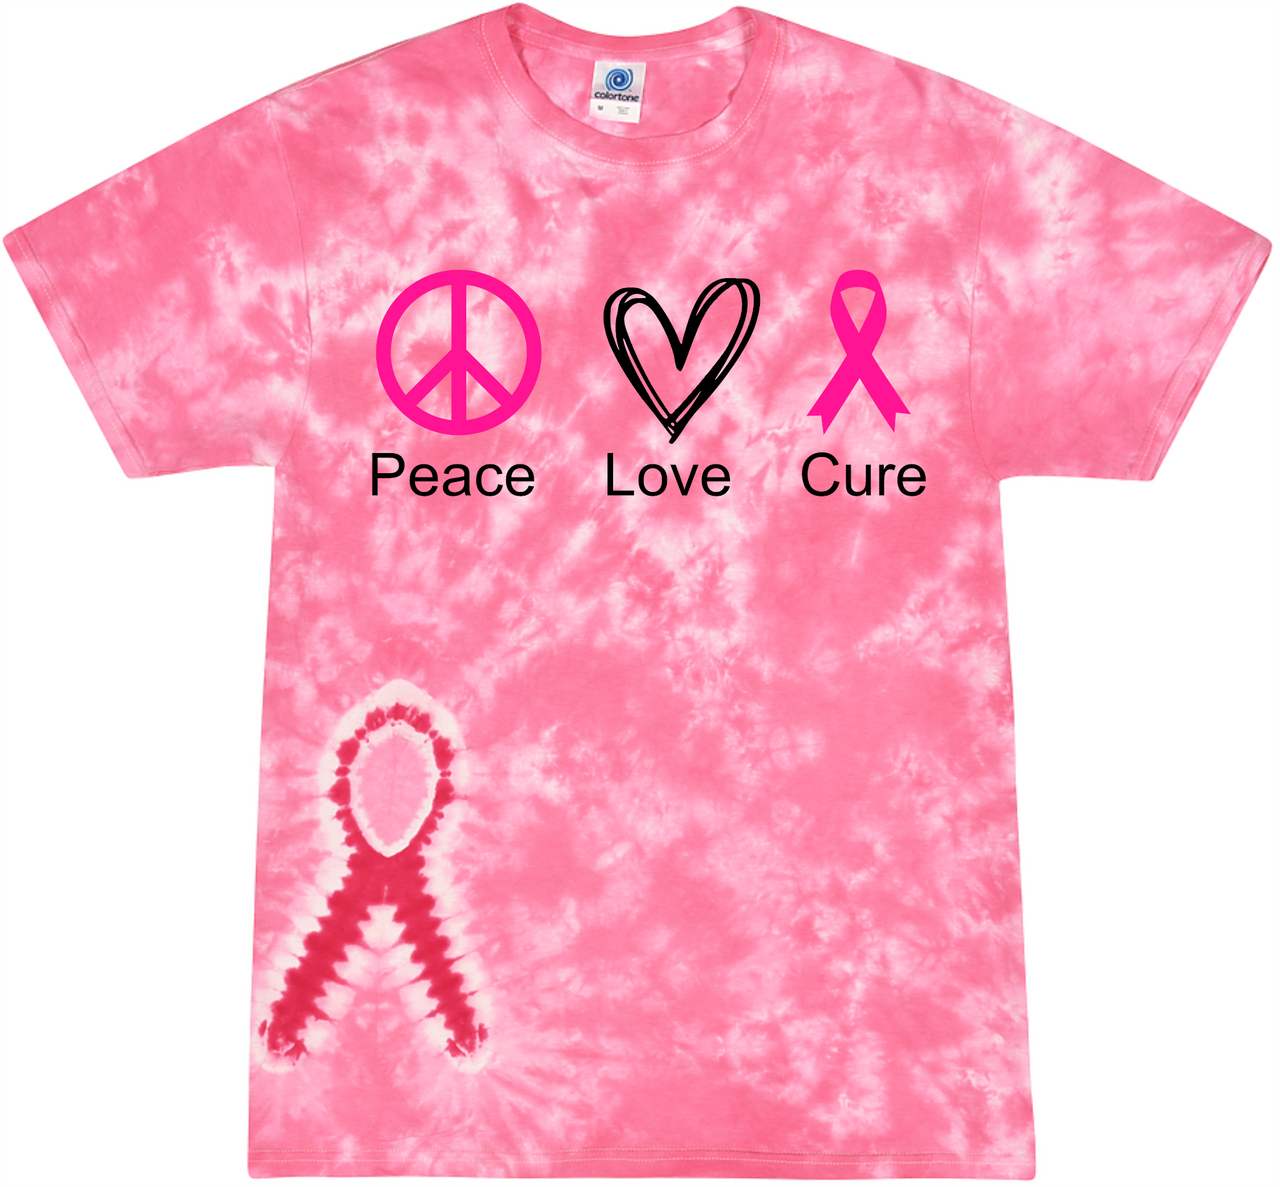 Peace Love Cure Tie-dyed Tee